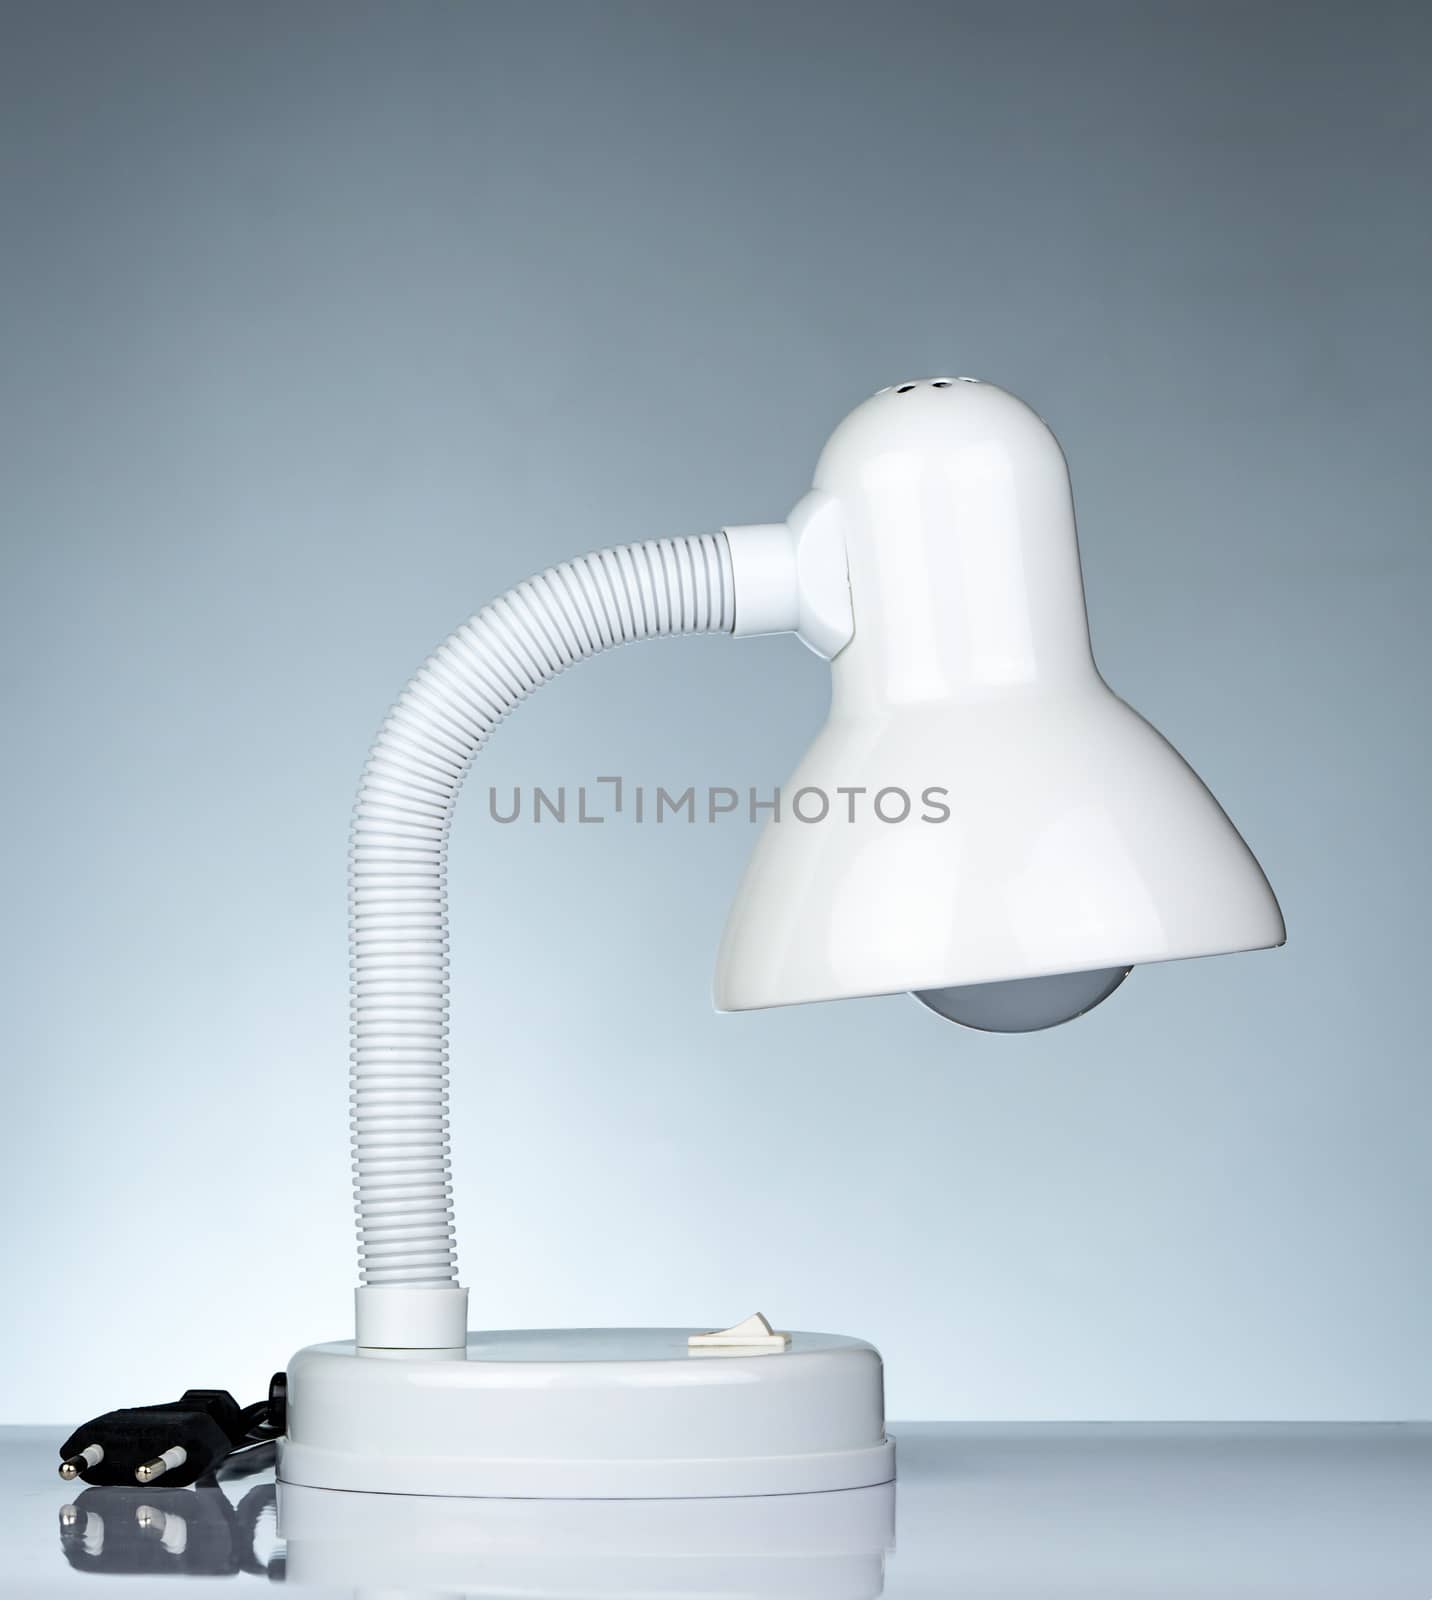 Unplugged white modern table lamp isolated on white table on gradient background. Desk lamp for reading a book in dormitory room. Home and office furniture with minimalist design. Desk spotlight.